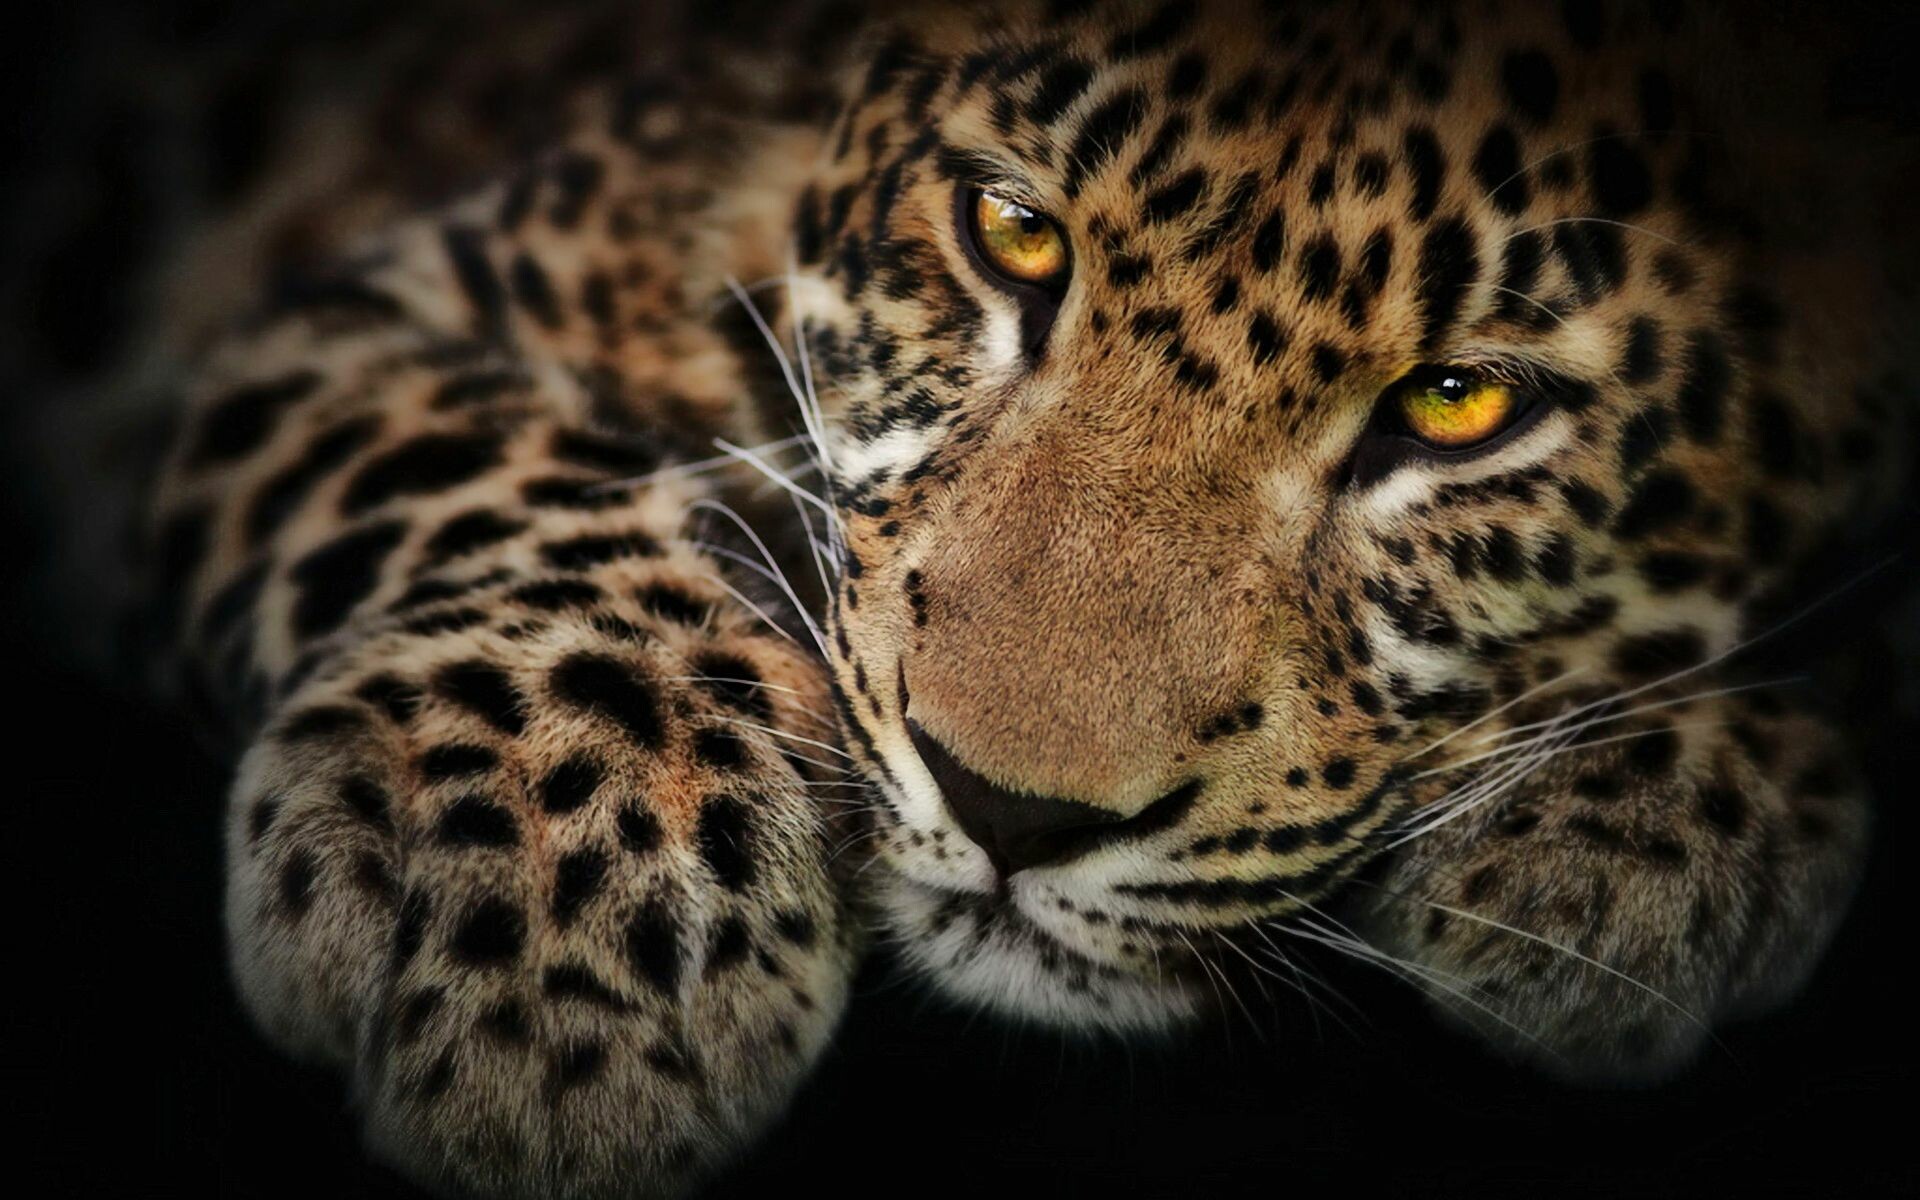 61+ Jaguar Wallpapers: HD, 4K, 5K for PC and Mobile | Download free images  for iPhone, Android